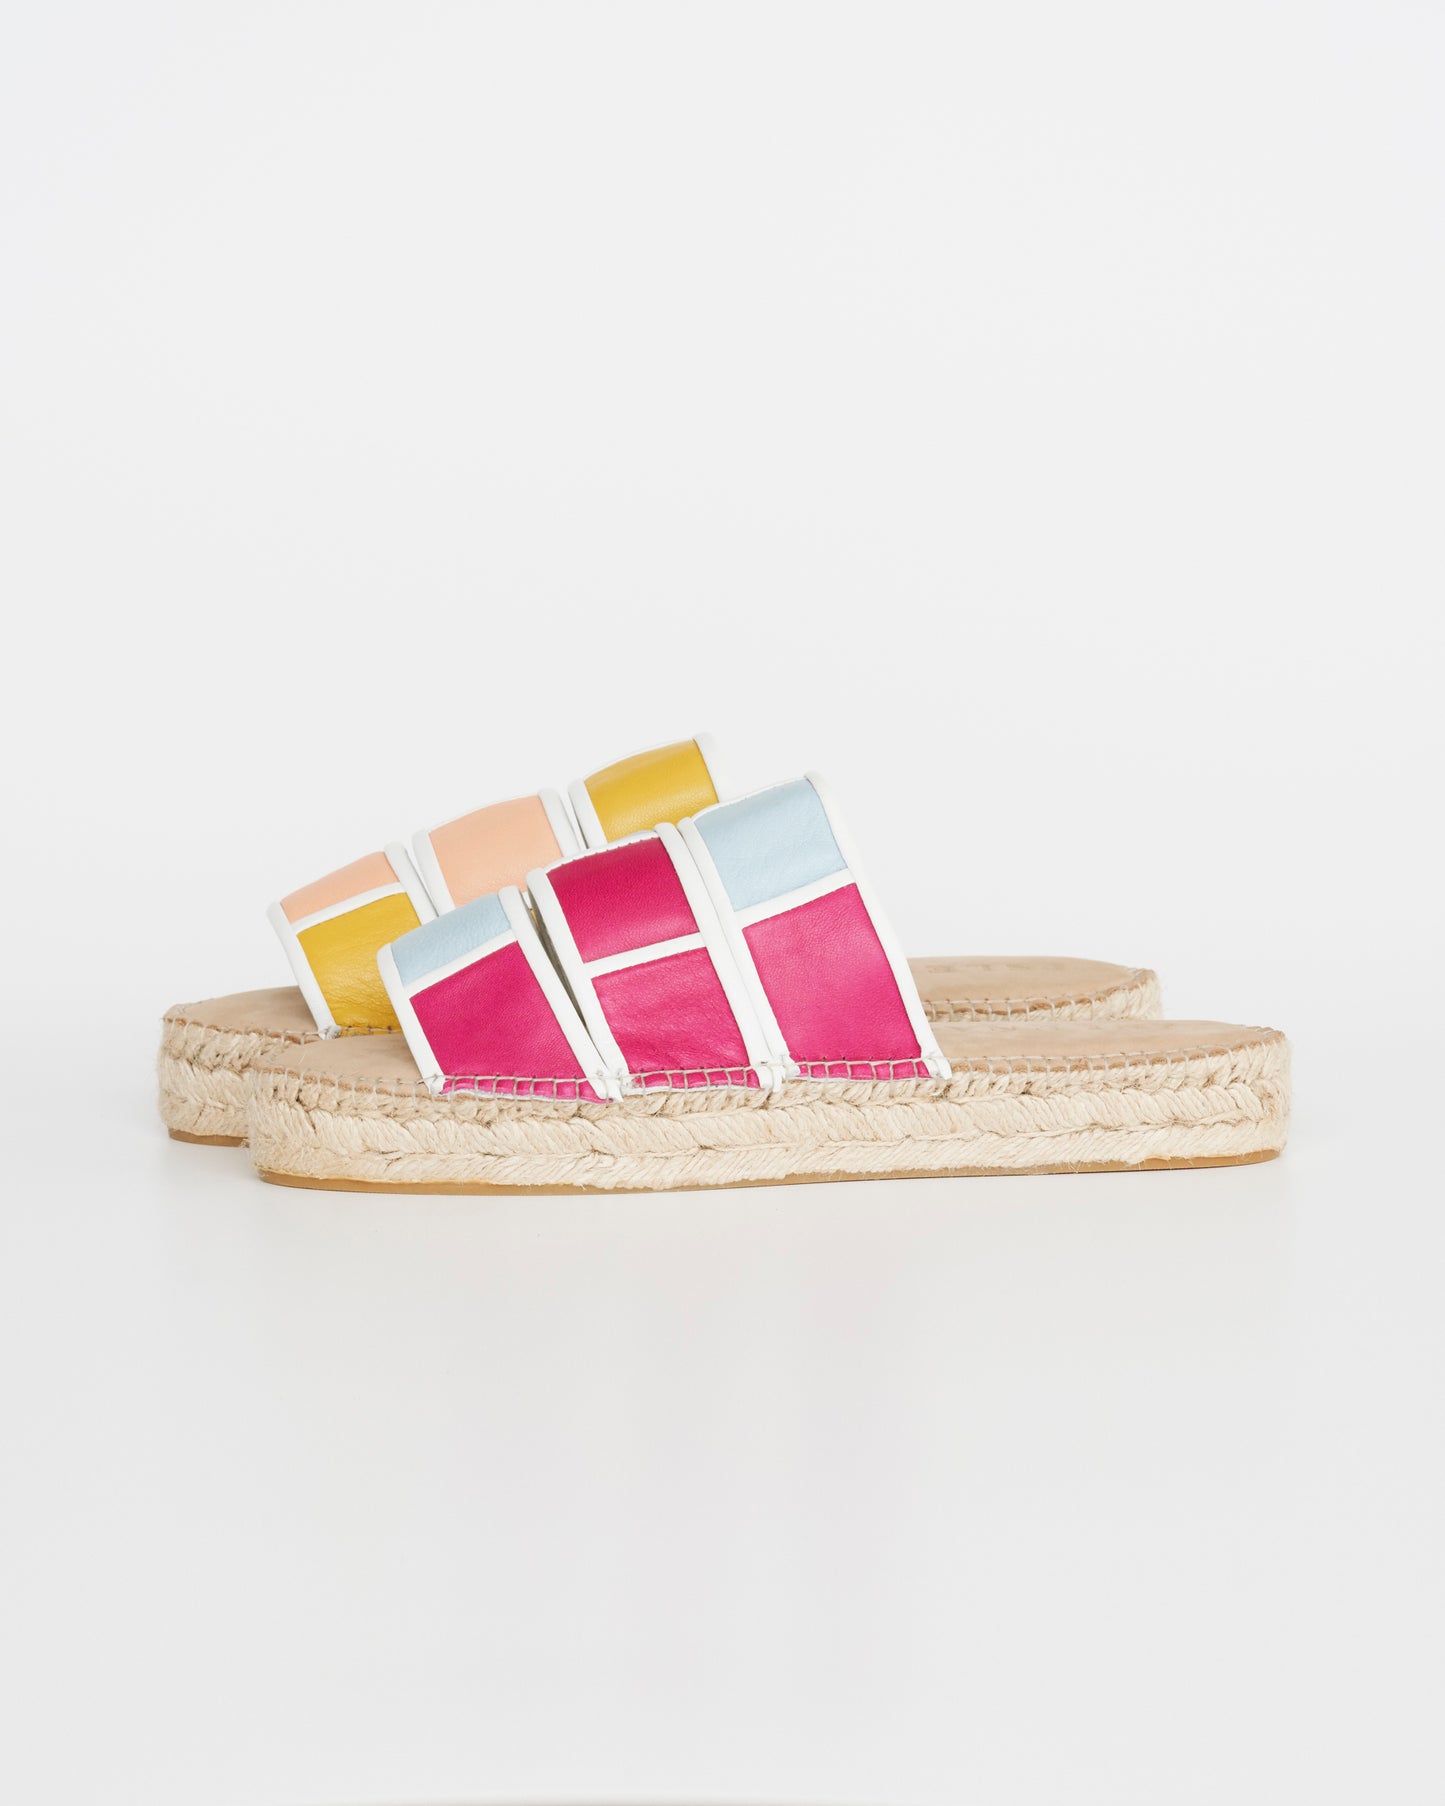 Colorful Espadrille Sandal Shoes for Women